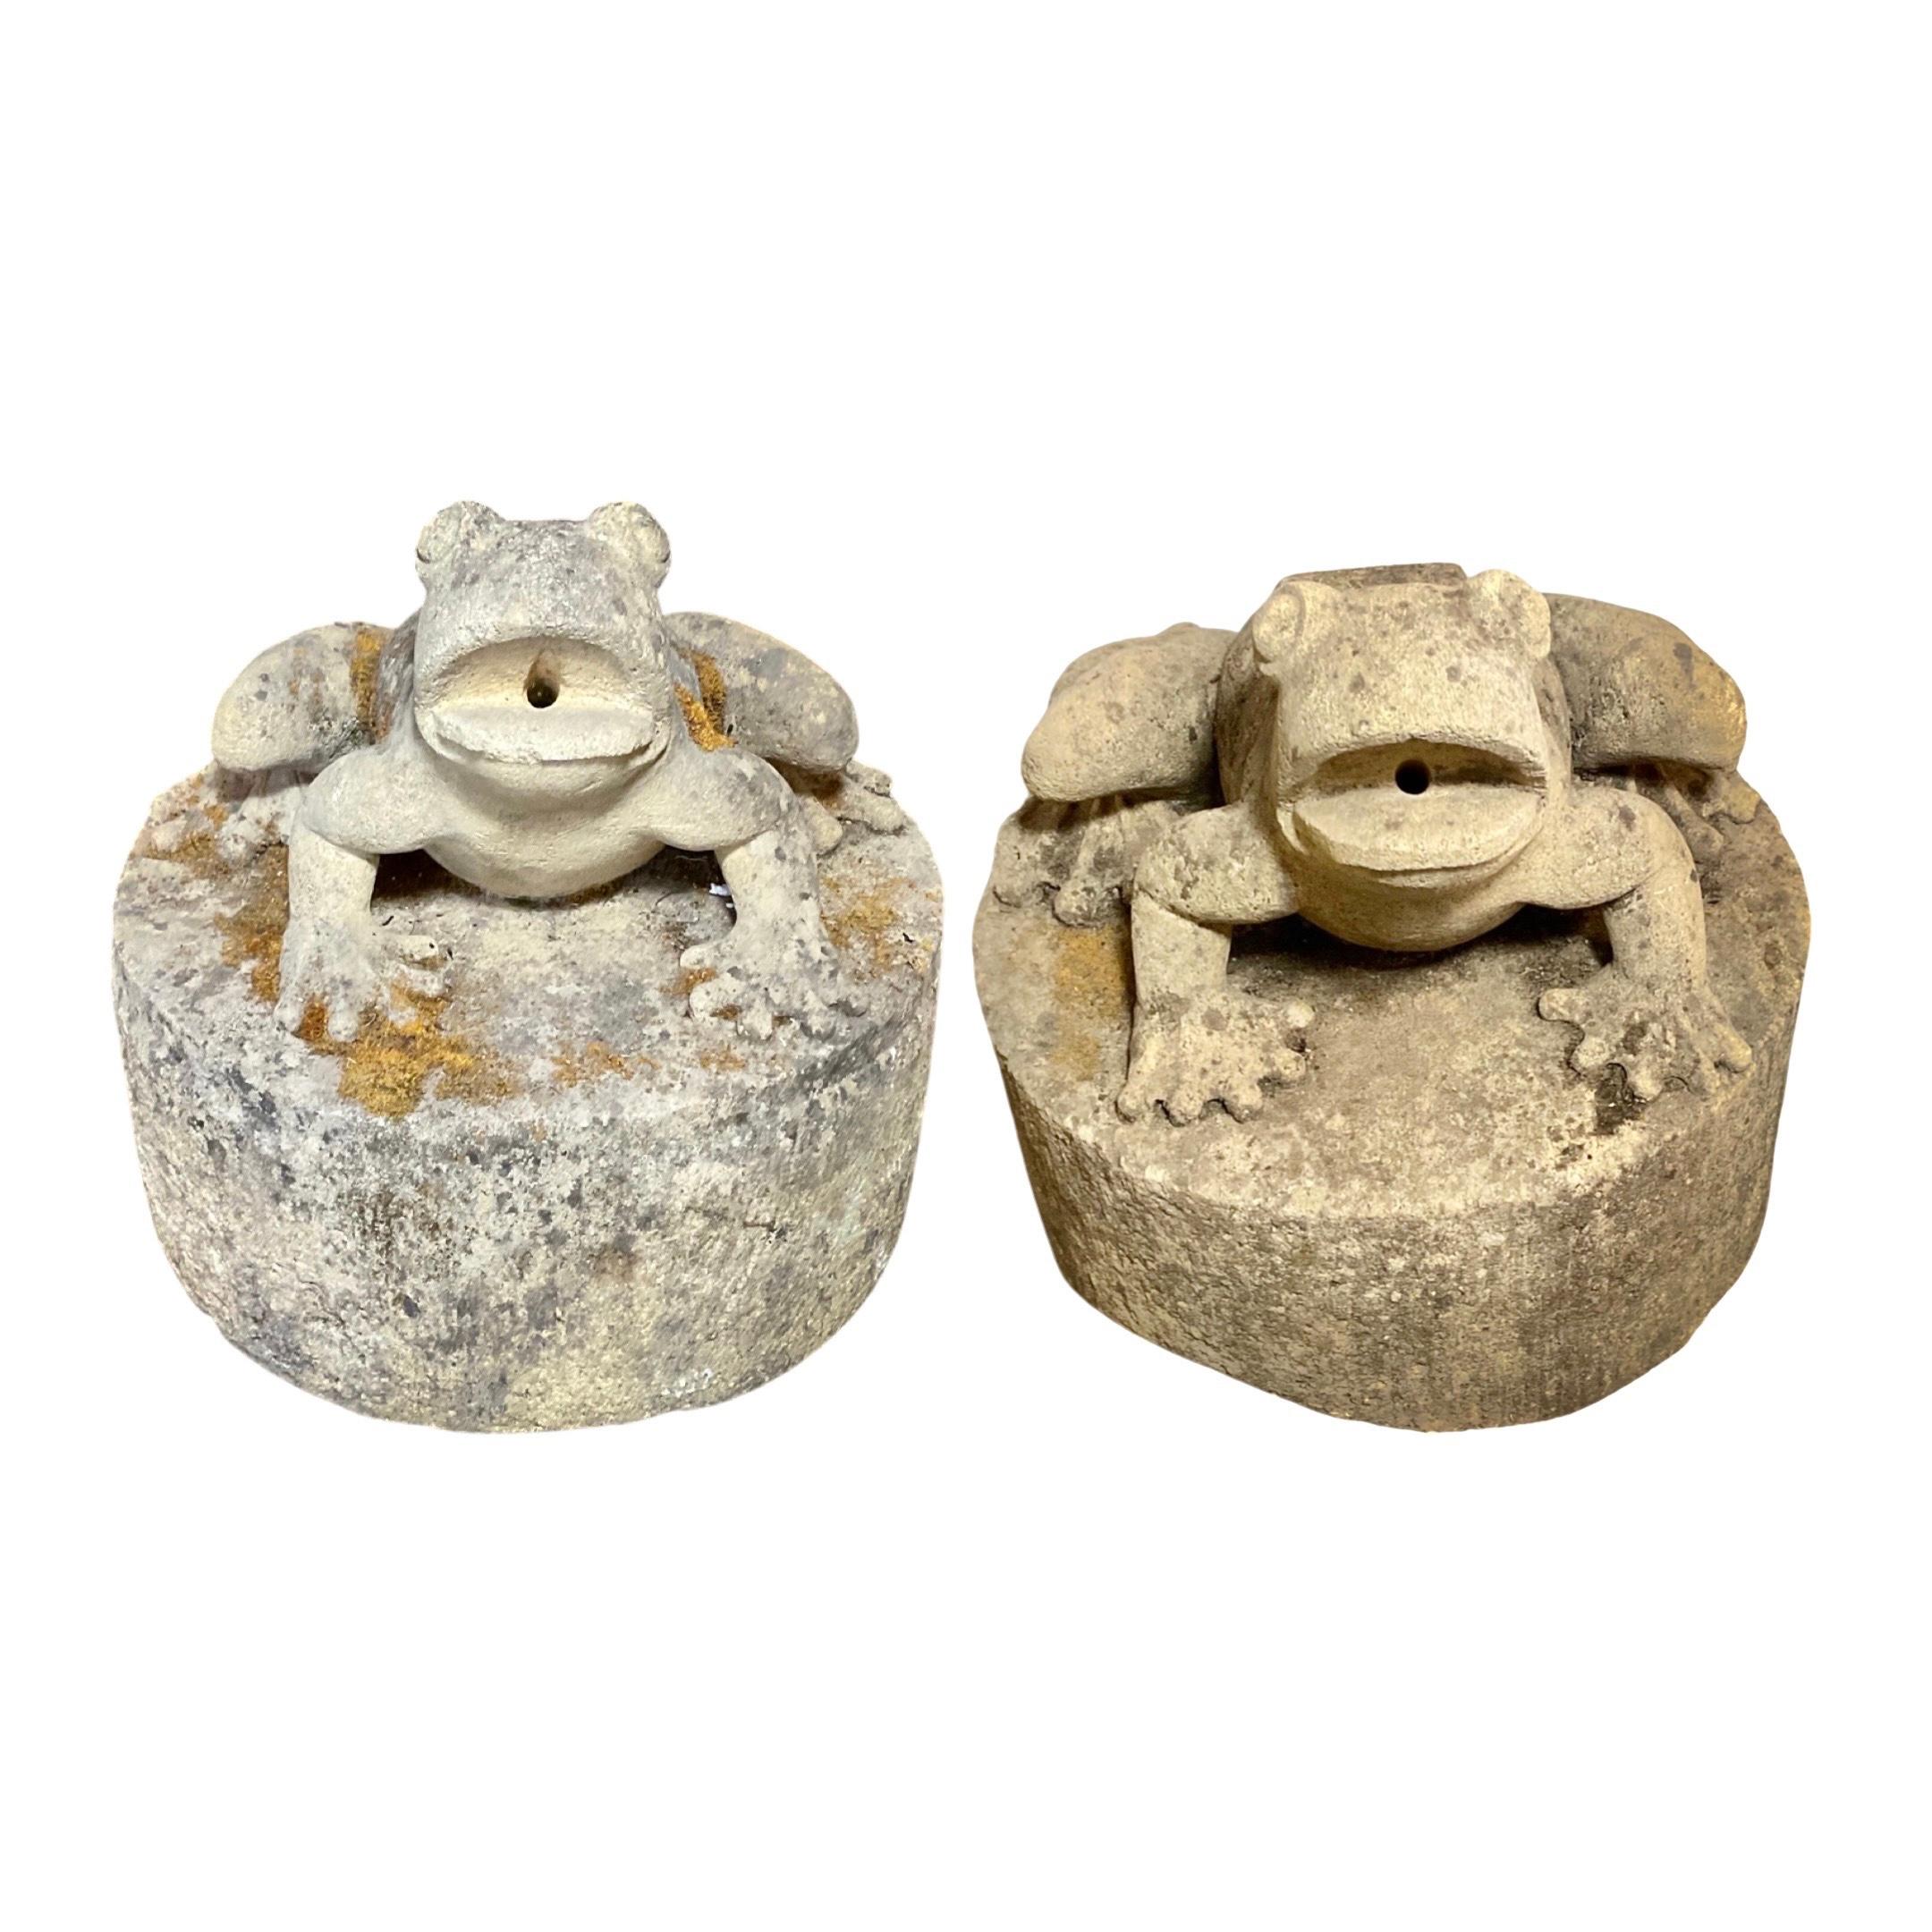 This English Fountain Carved Frog Head is a pair of limestone pieces dating back to the 18th century. From England, these fountain frog heads are perfect to recreate historical atmosphere in your garden or yard. With their timeless design, these